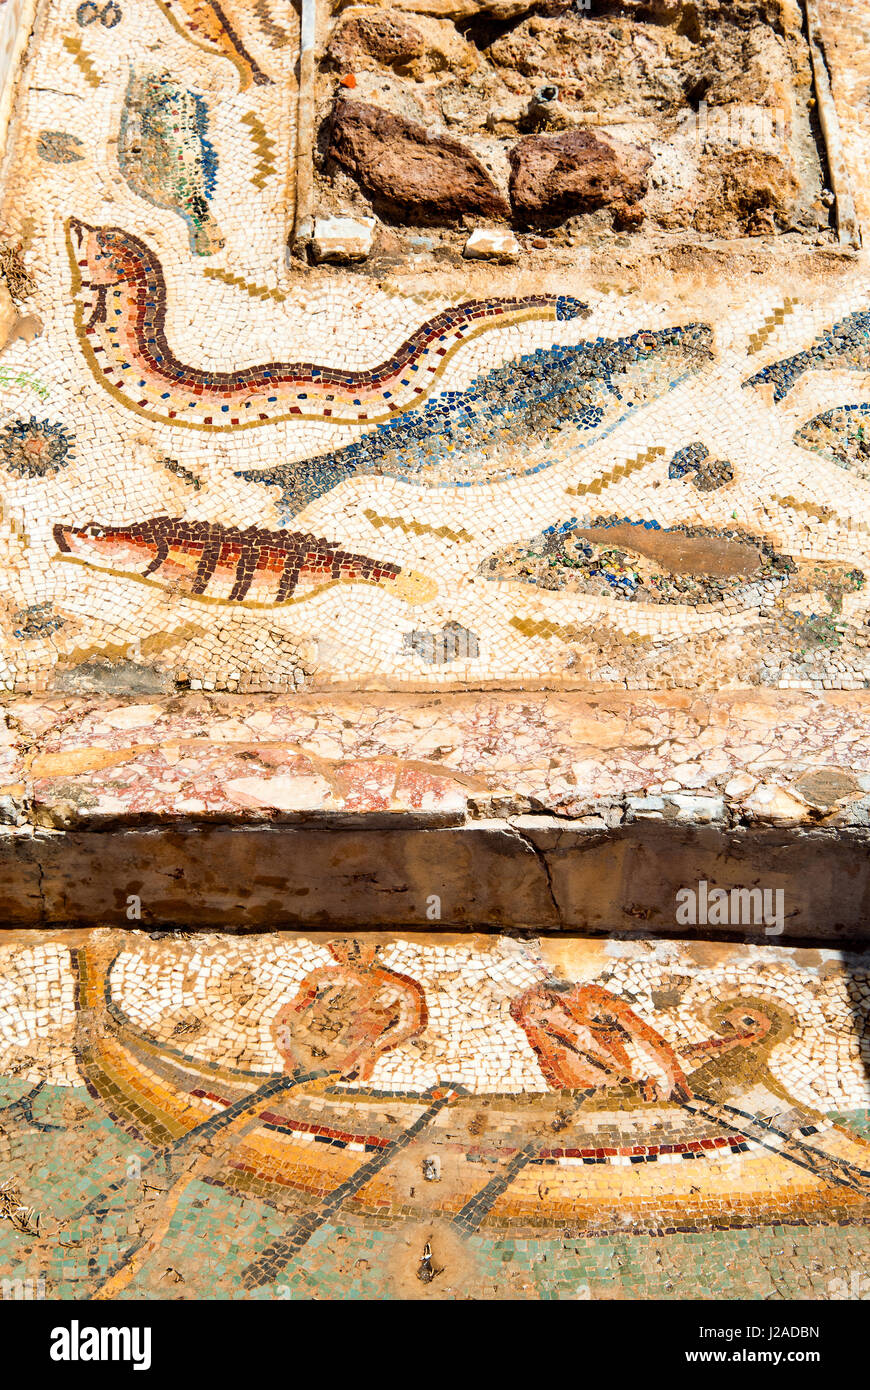 Mosaic of fishermen and fish, Utica Punic and Roman archaeological site, Tunisia, North Africa Stock Photo